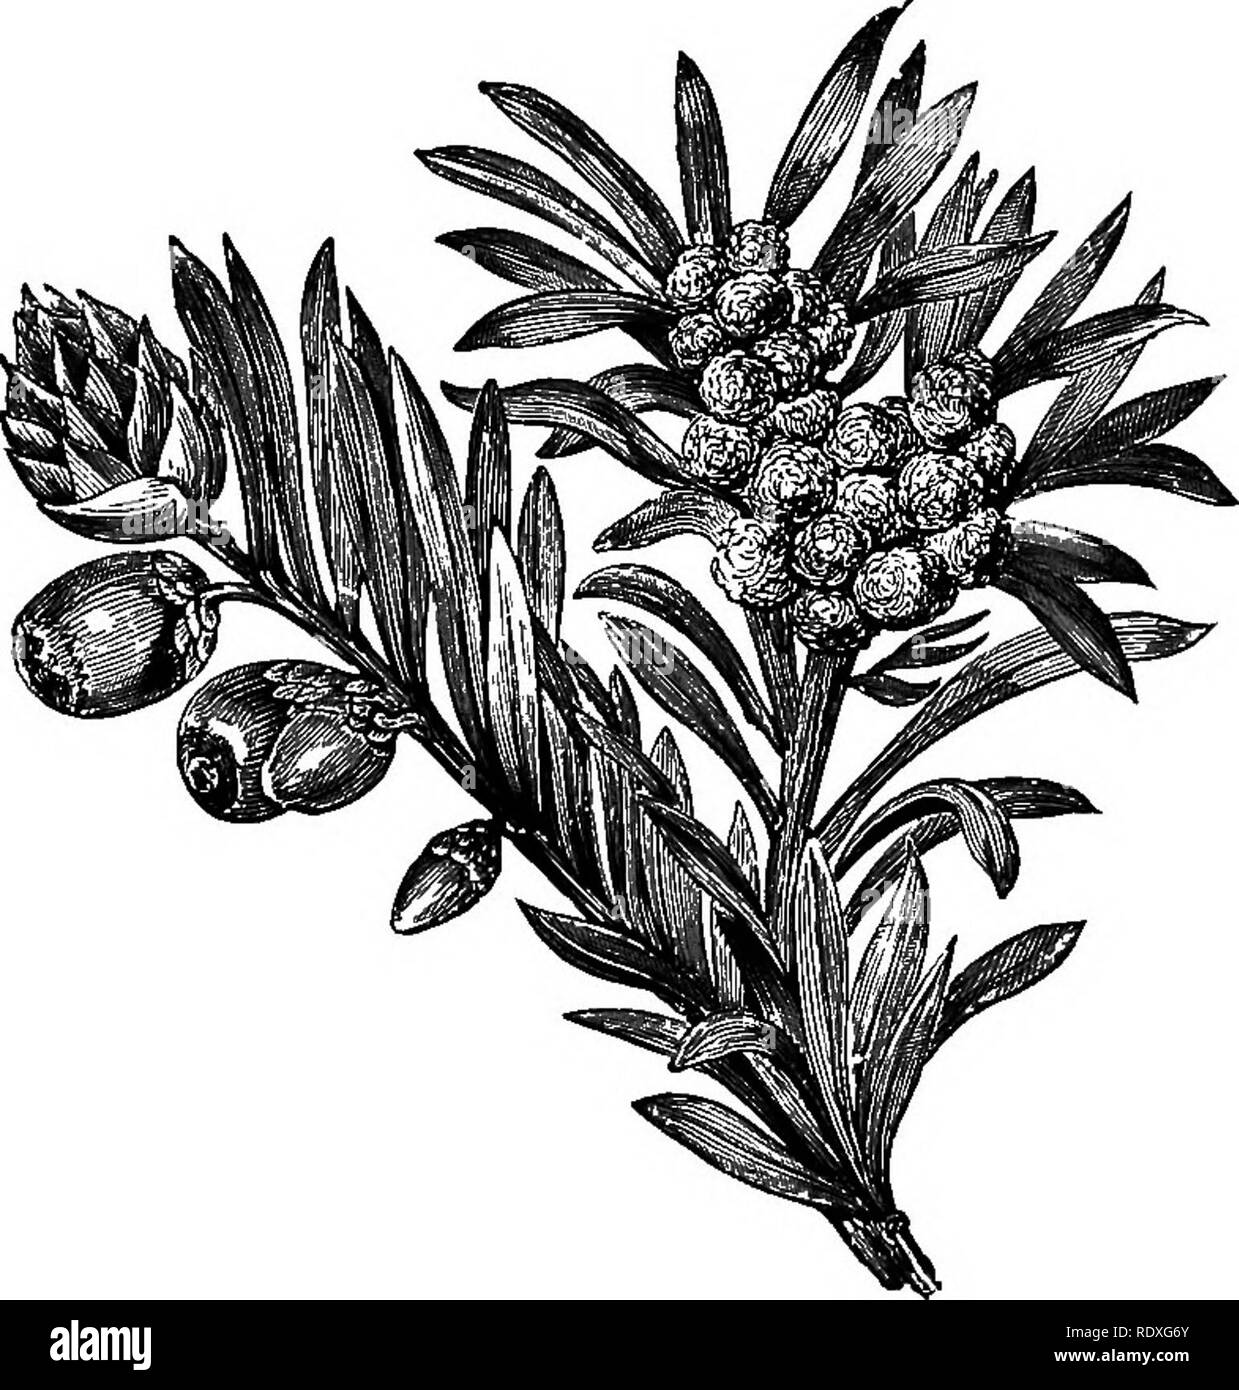 . The Book of gardening; a handbook of horticulture. Gardening; Horticulture. 5i6 THE BOOK OF GARDENING. Taxus baccata (English Yew) (Fig. 328) is familiar to everyone. Thoroughly hardy, and distinct from all other trees, it is too well known to need more than passing reference. Some of its varieties are, however, far from familiar, and attention will be drawn to a few of the most distinct and meritorious. T. b. adpressa is of compact growth, with spreading branches and dark green leaves; it is very ornamental and useful for small gardens. T. b. a. variegata is a prettily-marked variety of muc Stock Photo